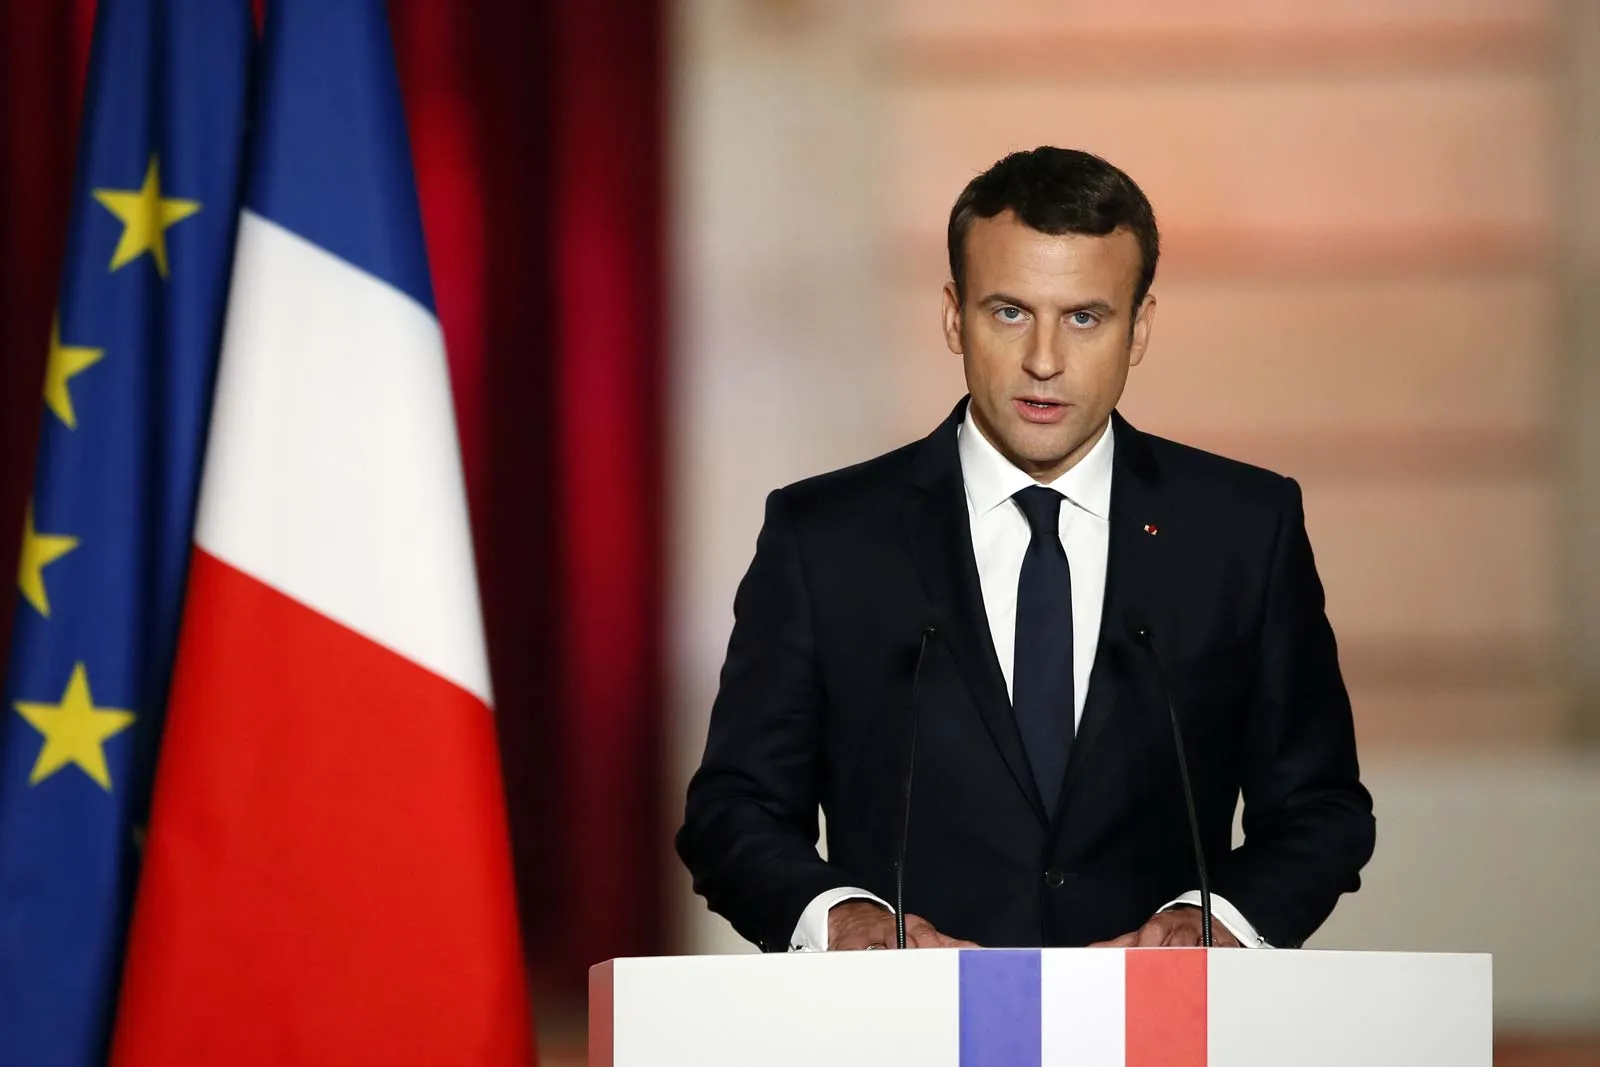 France pledges to wage total economic and financial war on Russia